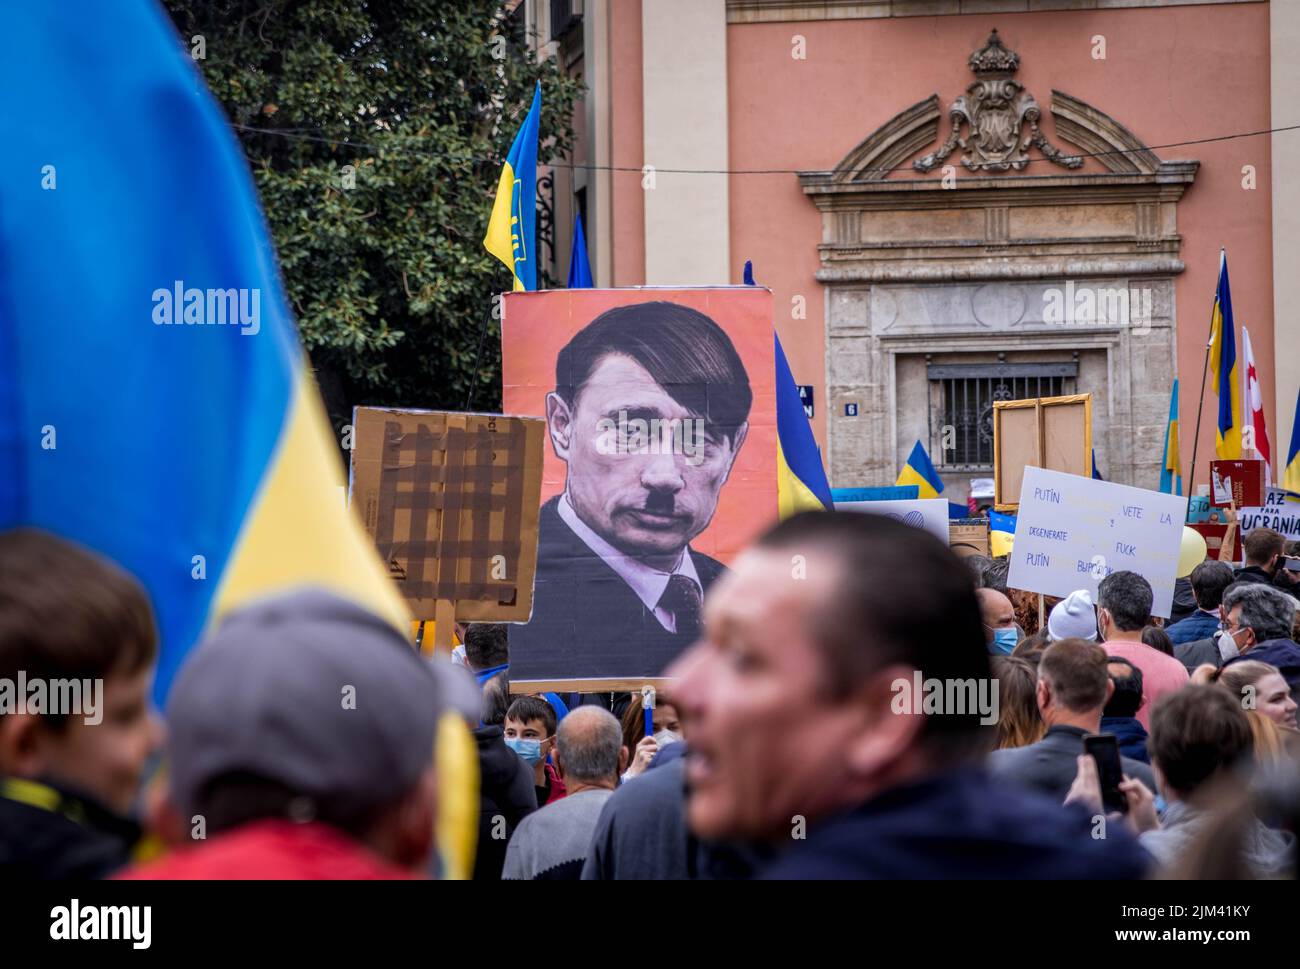 Picture of Poster of Vladimir Putin Characterized as Aldolf Hitler at a Ukrainian Anti-War Demonstration. Concept of Nazi dictator, Putler of Russia Stock Photo